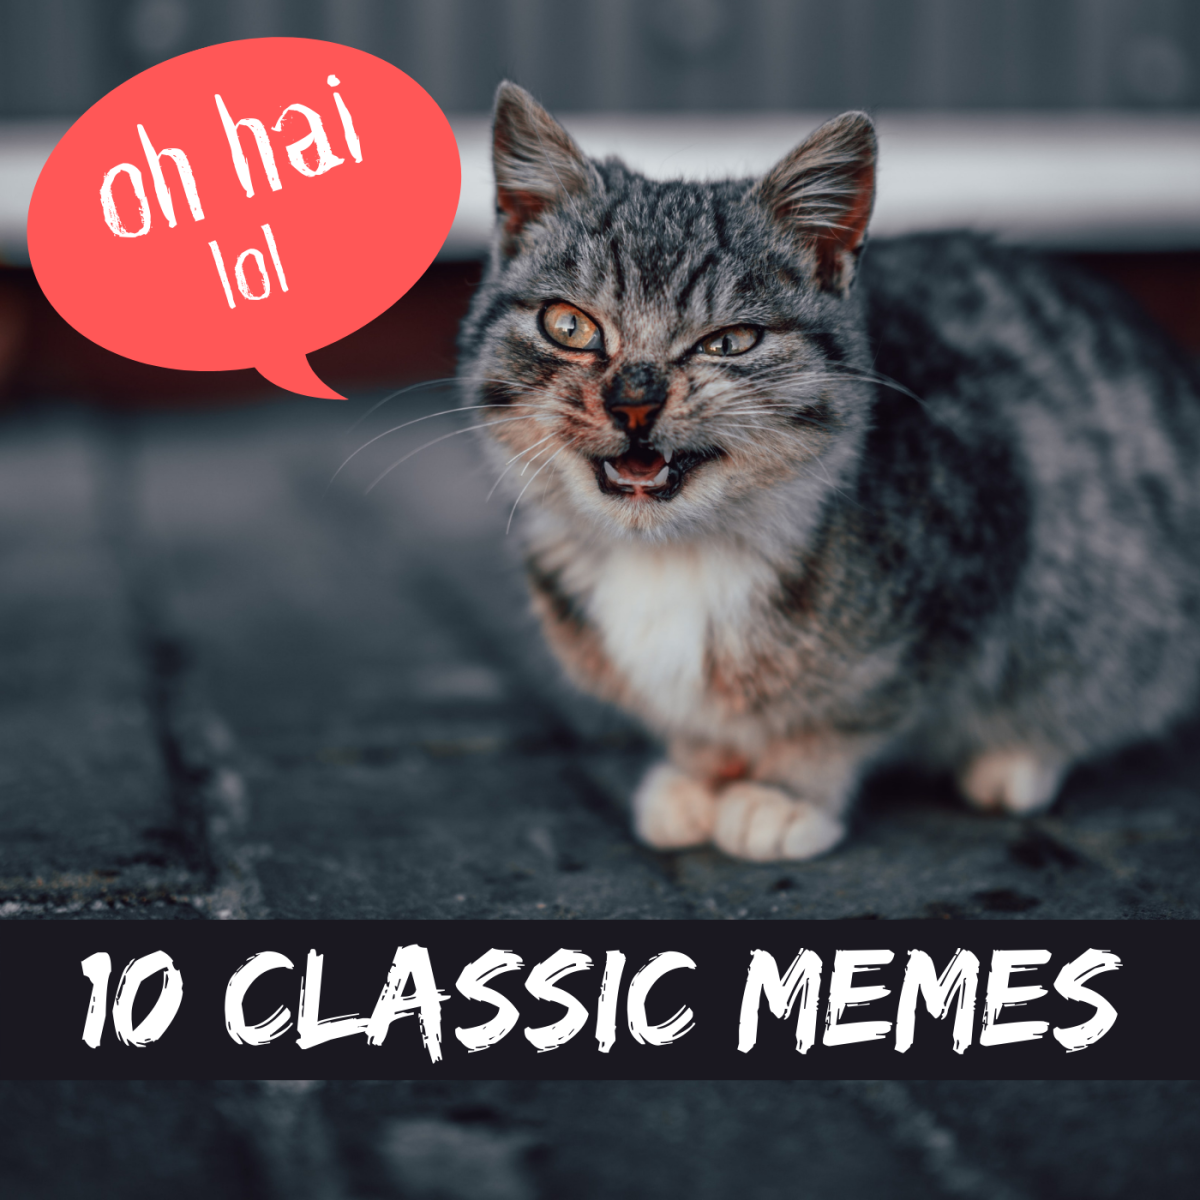 Refresh yourself on 10 of the best internet memes of all time, from Lolcats to Leeroy!